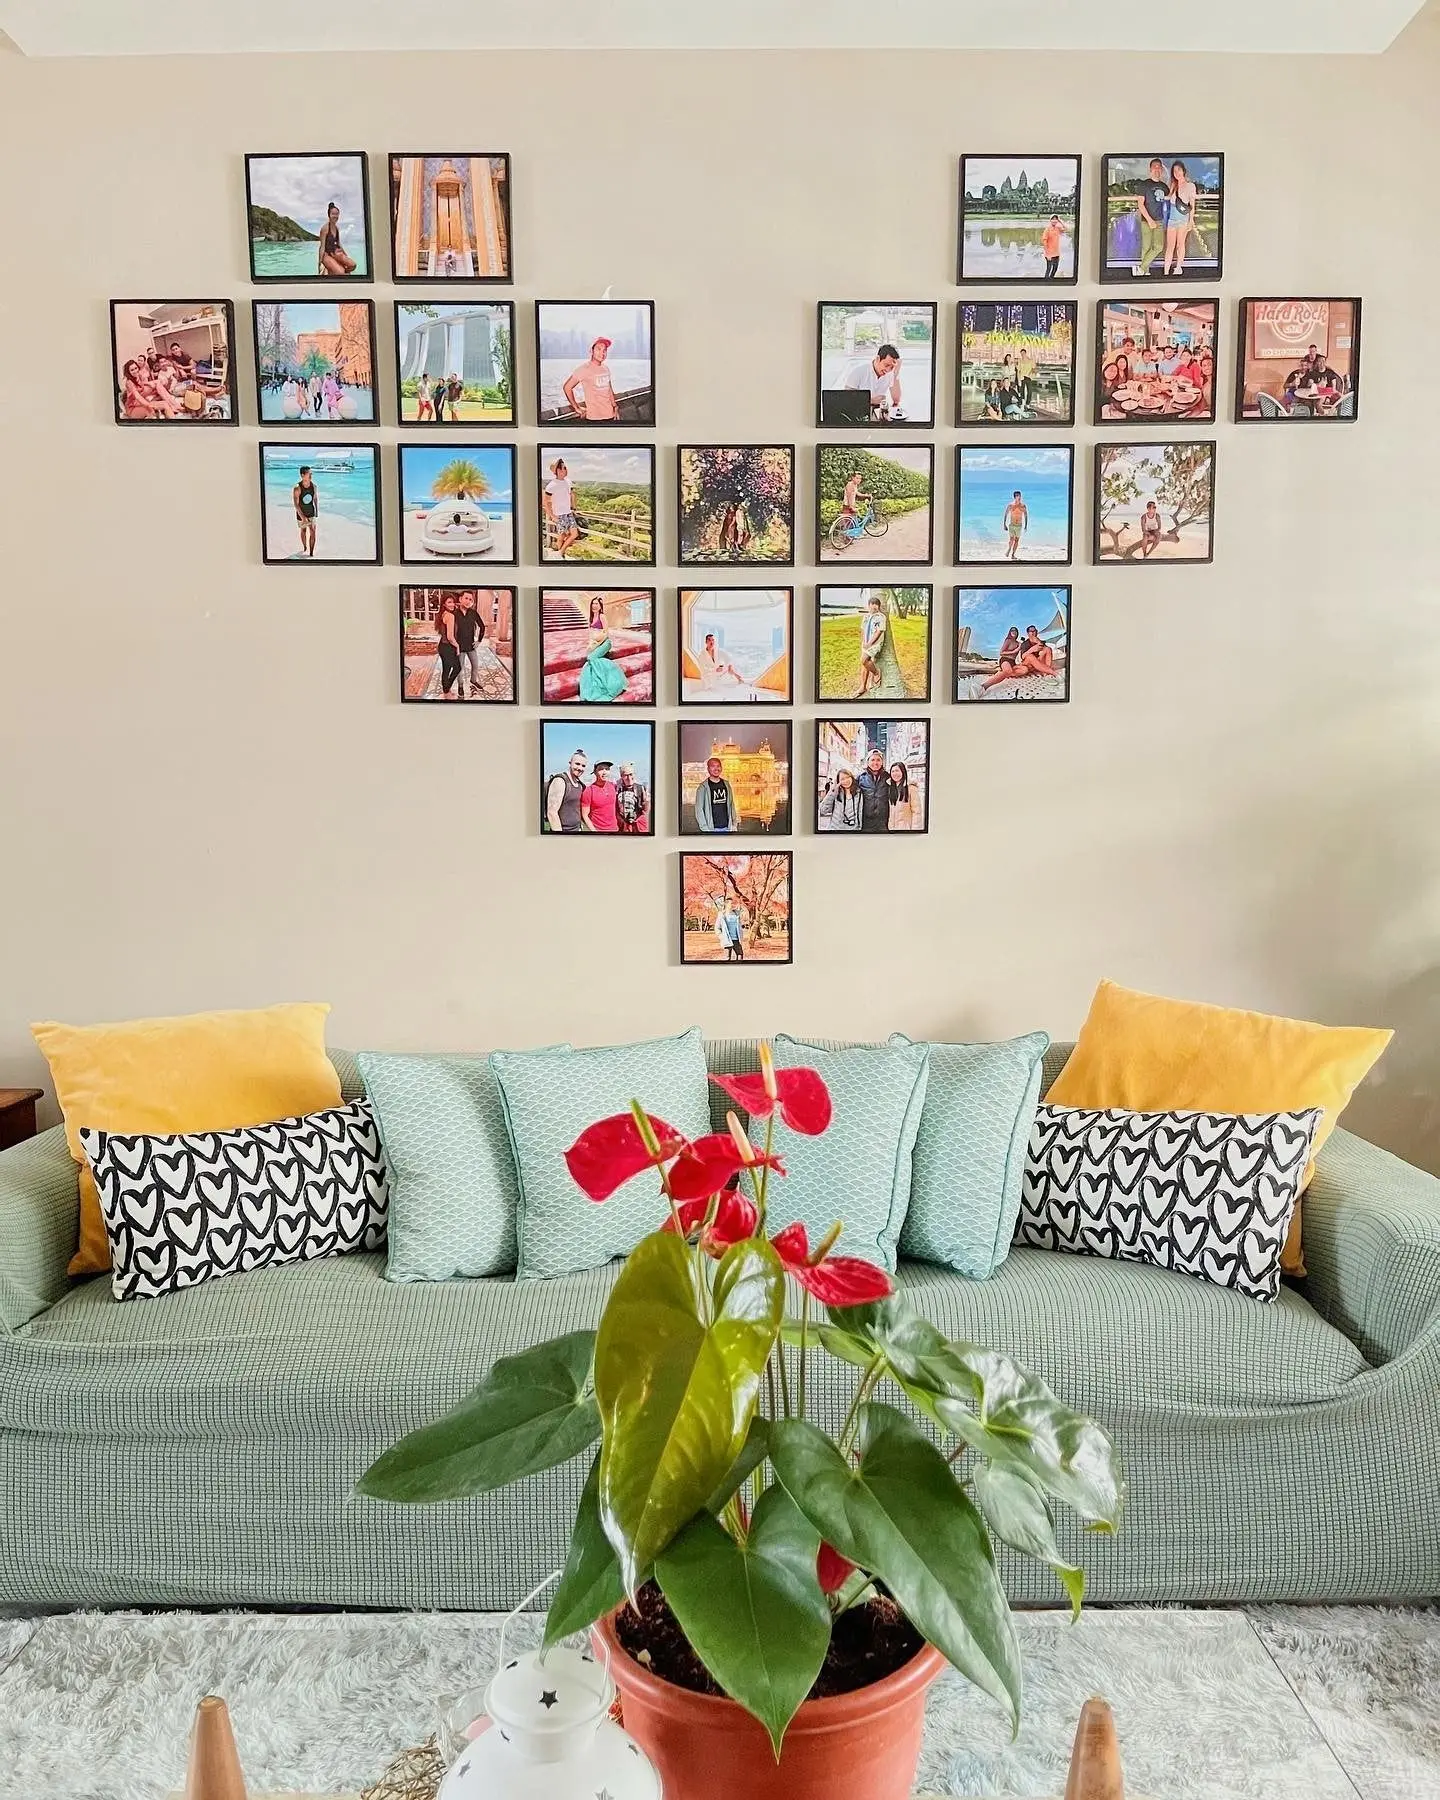 ARTMOUNT Recycle Plastic Wall Frames Picture Mixtiles Frame With